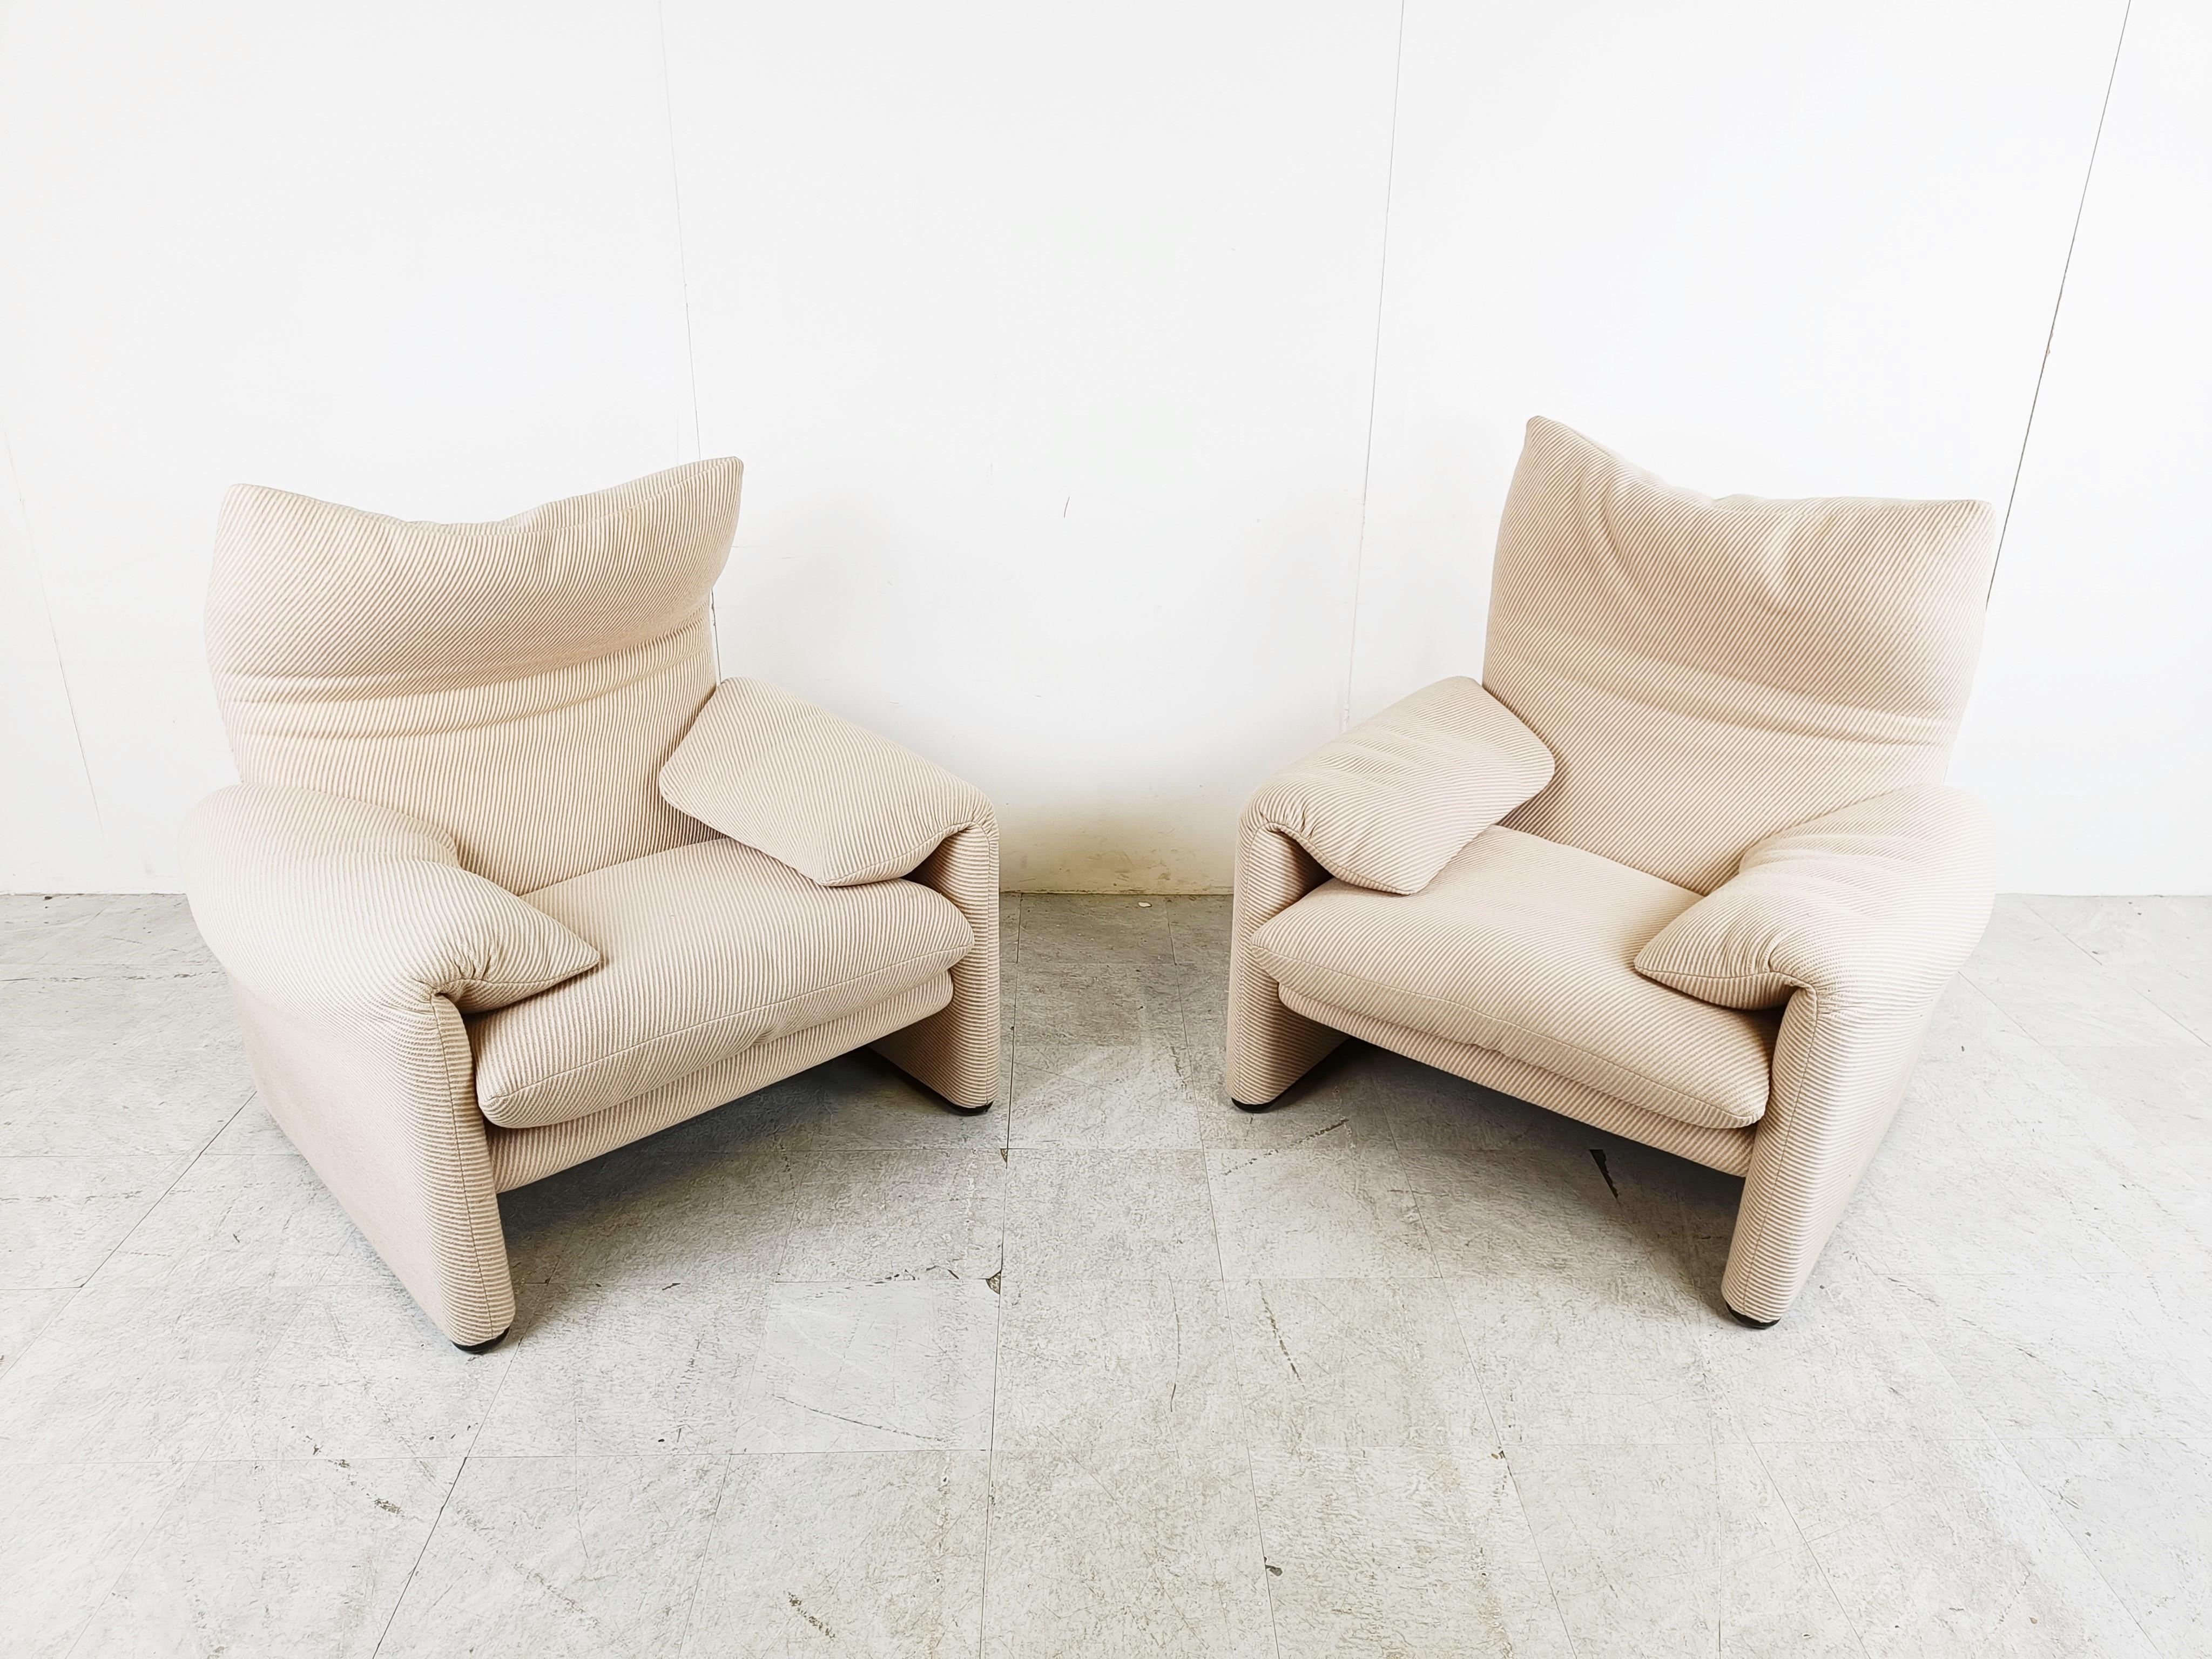 Late 20th Century Pair of Maralunga armchair by Vico Magistretti for Cassina, 1973 